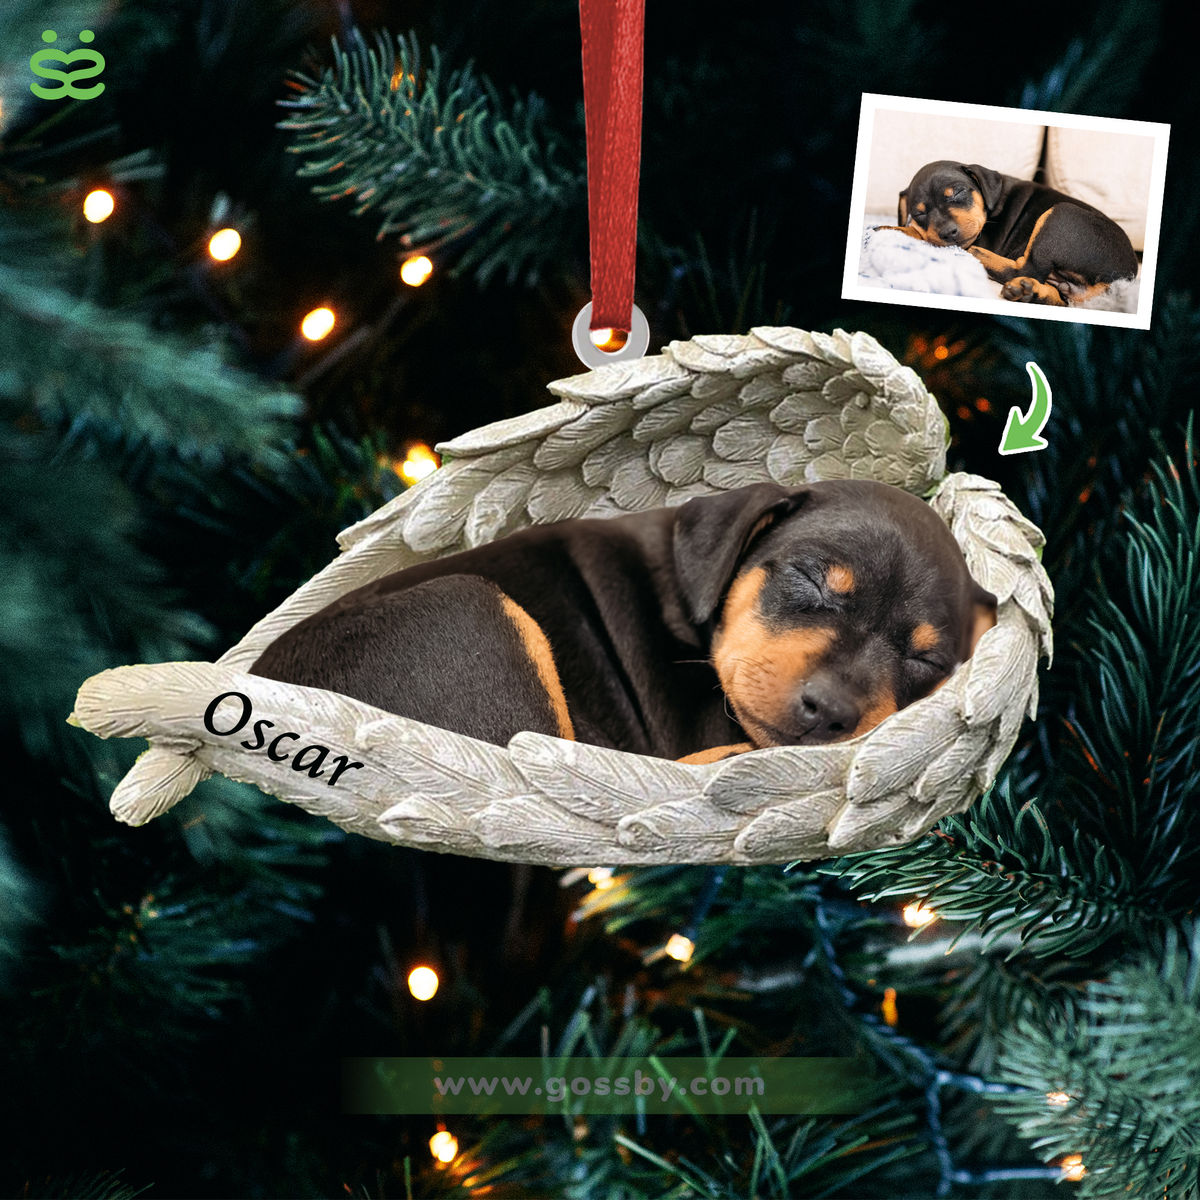 Dog Acrylic Ornament - Dog Lover Gifts - Sleeping Pet Within Angel Wings - Customized Your Photo Ornament, Custom Photo Gifts, Christmas Gifts_1